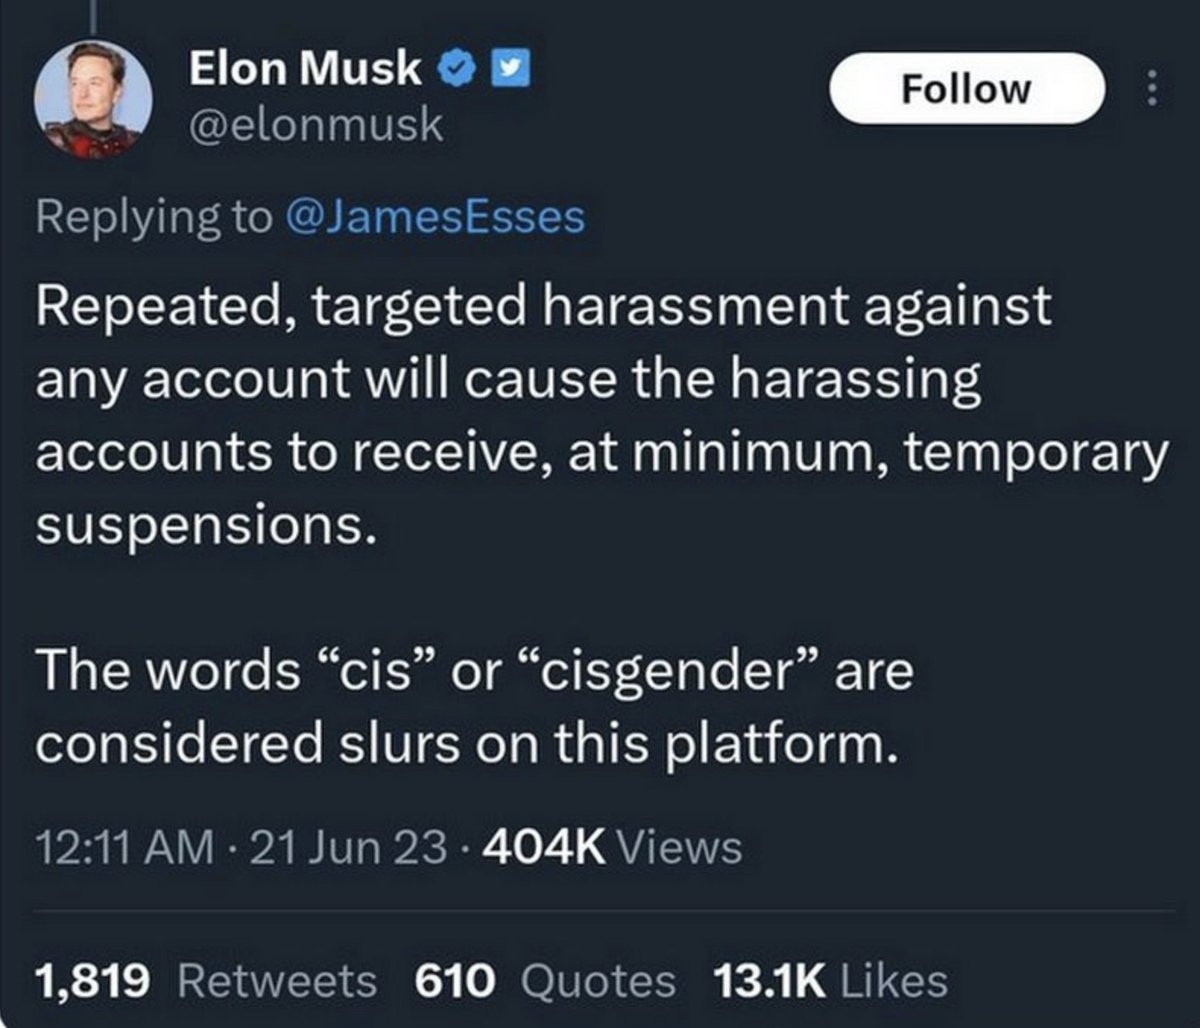 New Elon Musk policy (to be announced shortly): 'The words 'Democracy', 'Equality', 'Fairness', 'Justice' and 'Anti-discrimination' will be considered slurs on this platform.'